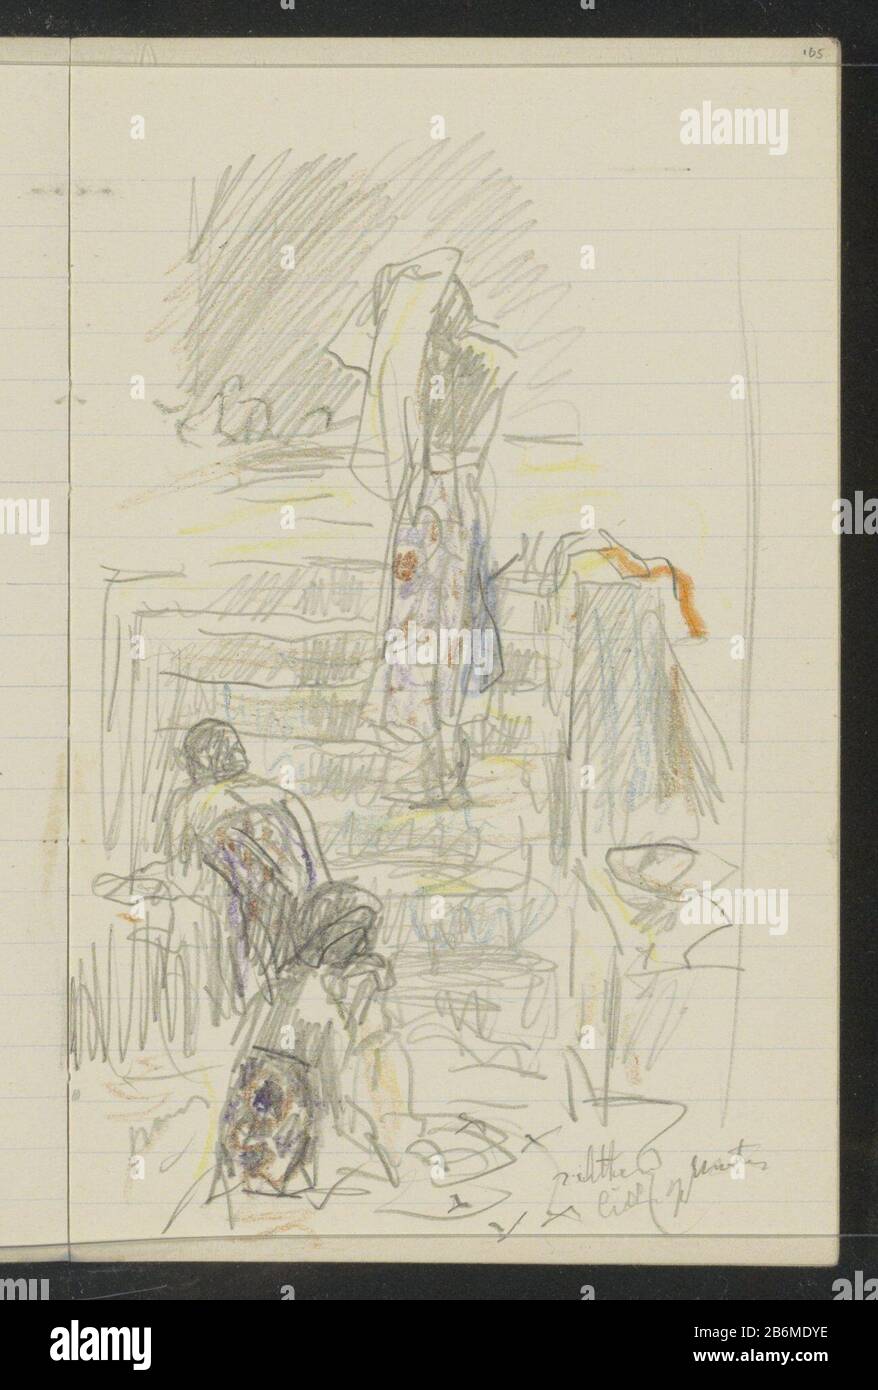 https://c8.alamy.com/comp/2B6MDYE/figuren-bij-een-trap-naar-een-rivier-figures-for-a-stairway-to-a-river-object-type-sketch-leaf-object-number-rp-t-1949-682-105-inscriptions-brands-color-note-hand-written-description-figures-drying-himself-or-washing-in-the-water-of-the-river-page-105-from-a-sketchbook-with-74-bladen-manufacturer-artist-marius-bauer-place-manufacture-indonesia-date-1931-physical-features-pencil-and-colored-chalk-on-lined-paper-material-lined-paper-chalk-subject-pencil-river-laundering-washing-and-bathing-aa-in-the-open-airflight-or-step-2B6MDYE.jpg